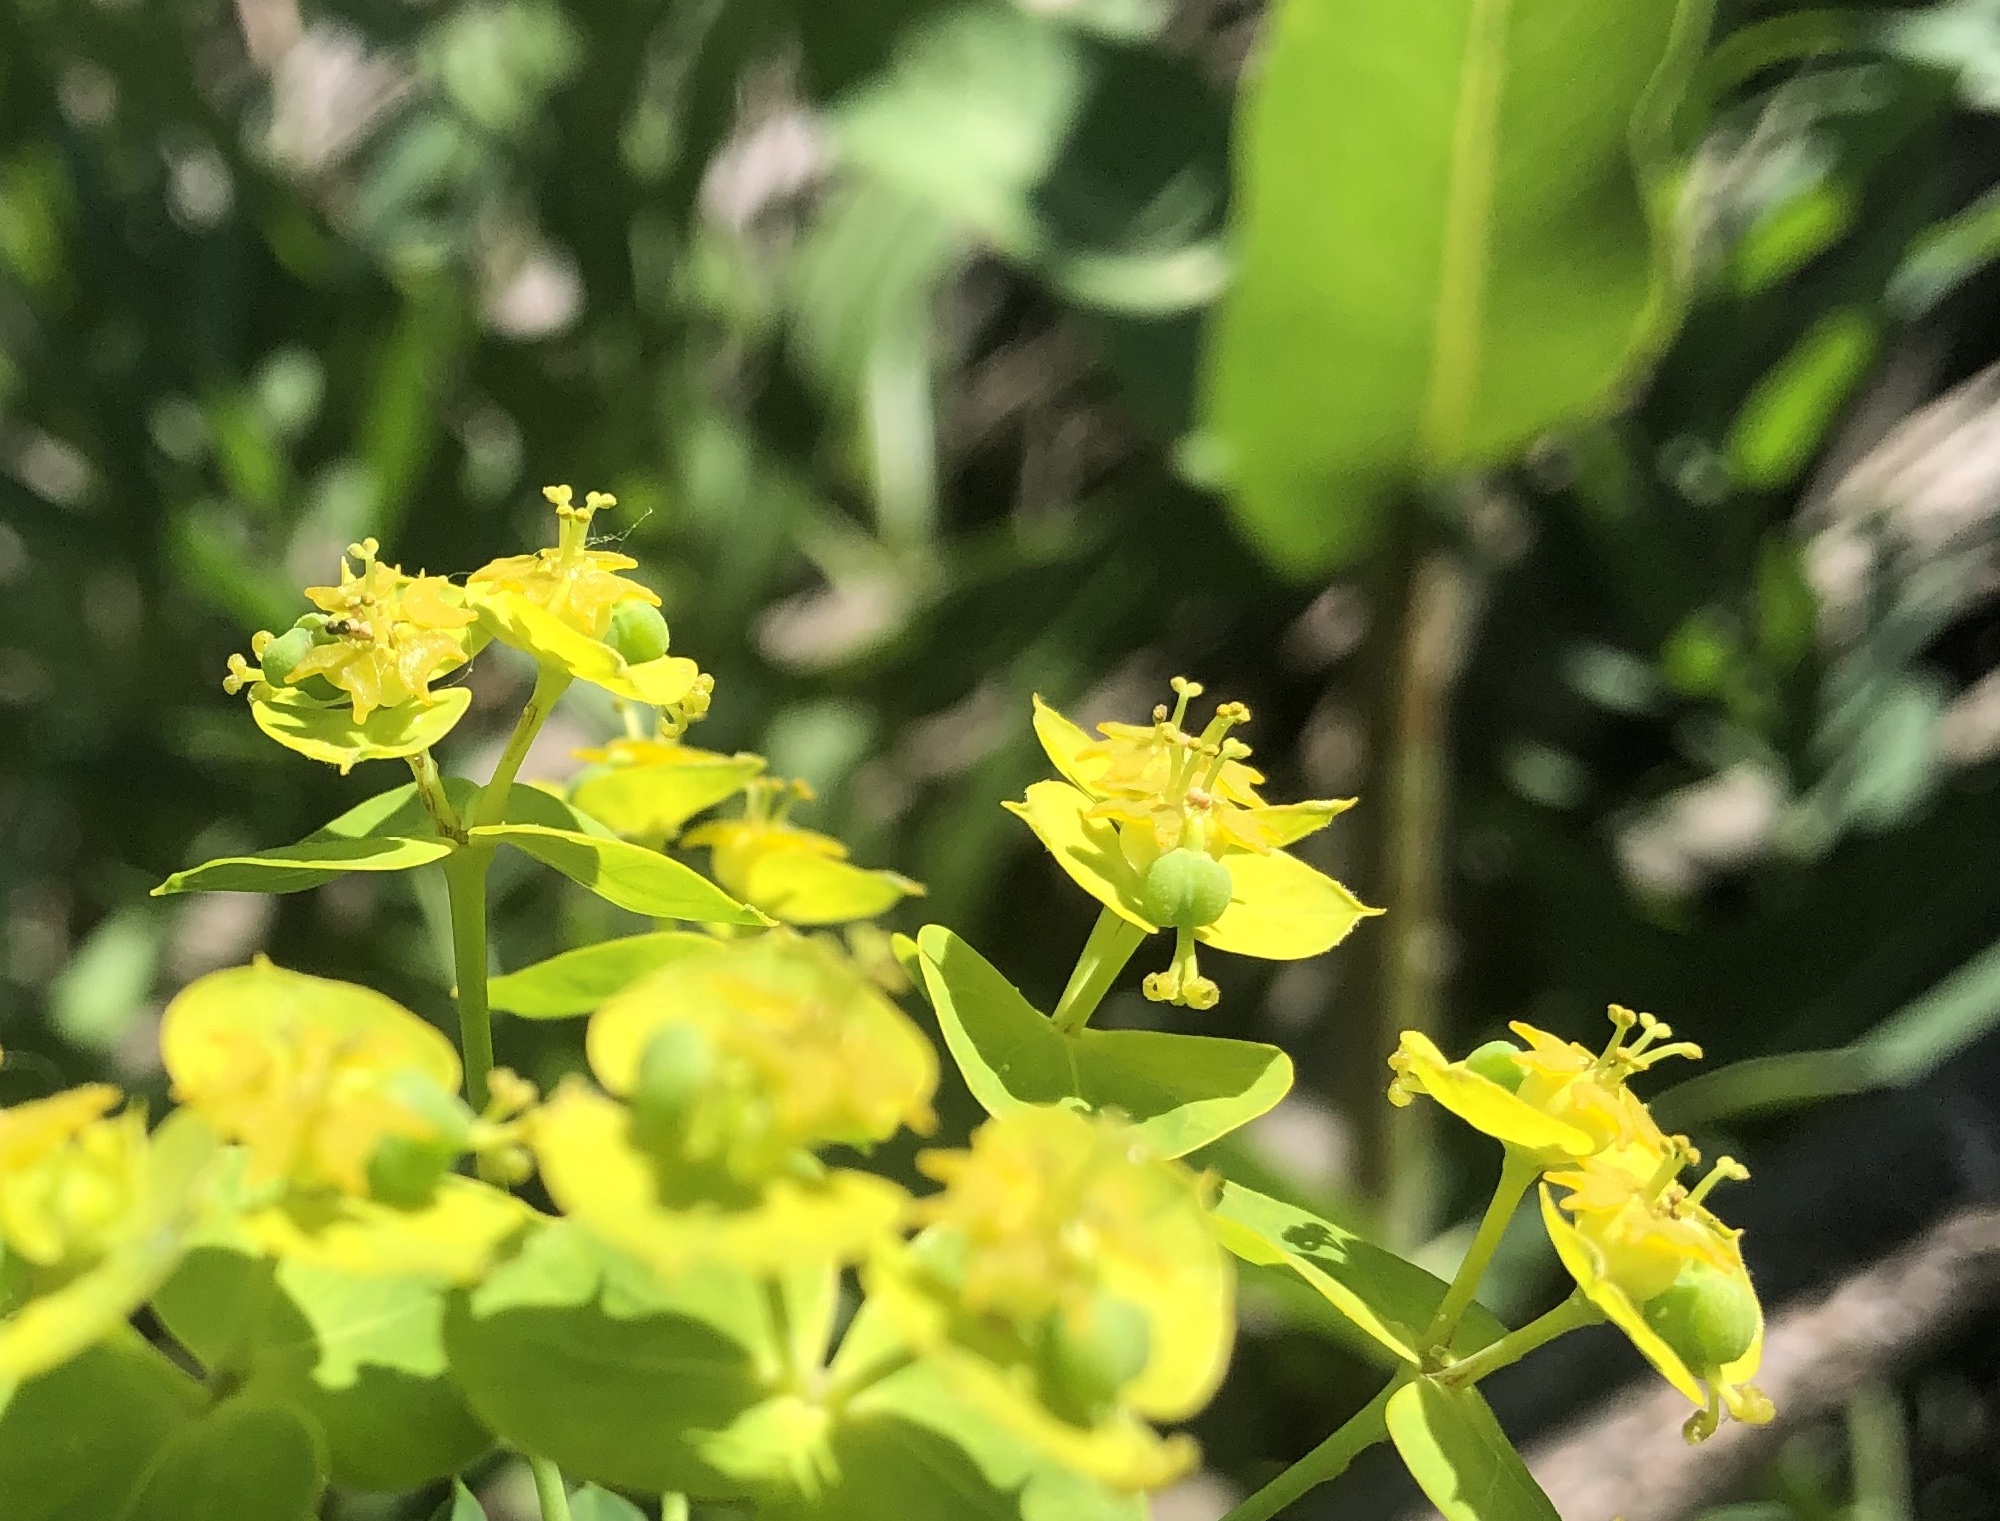 Leafy Spurge around Marion Dunn Pond in Madison, Wisconsin on June 21, 2021.